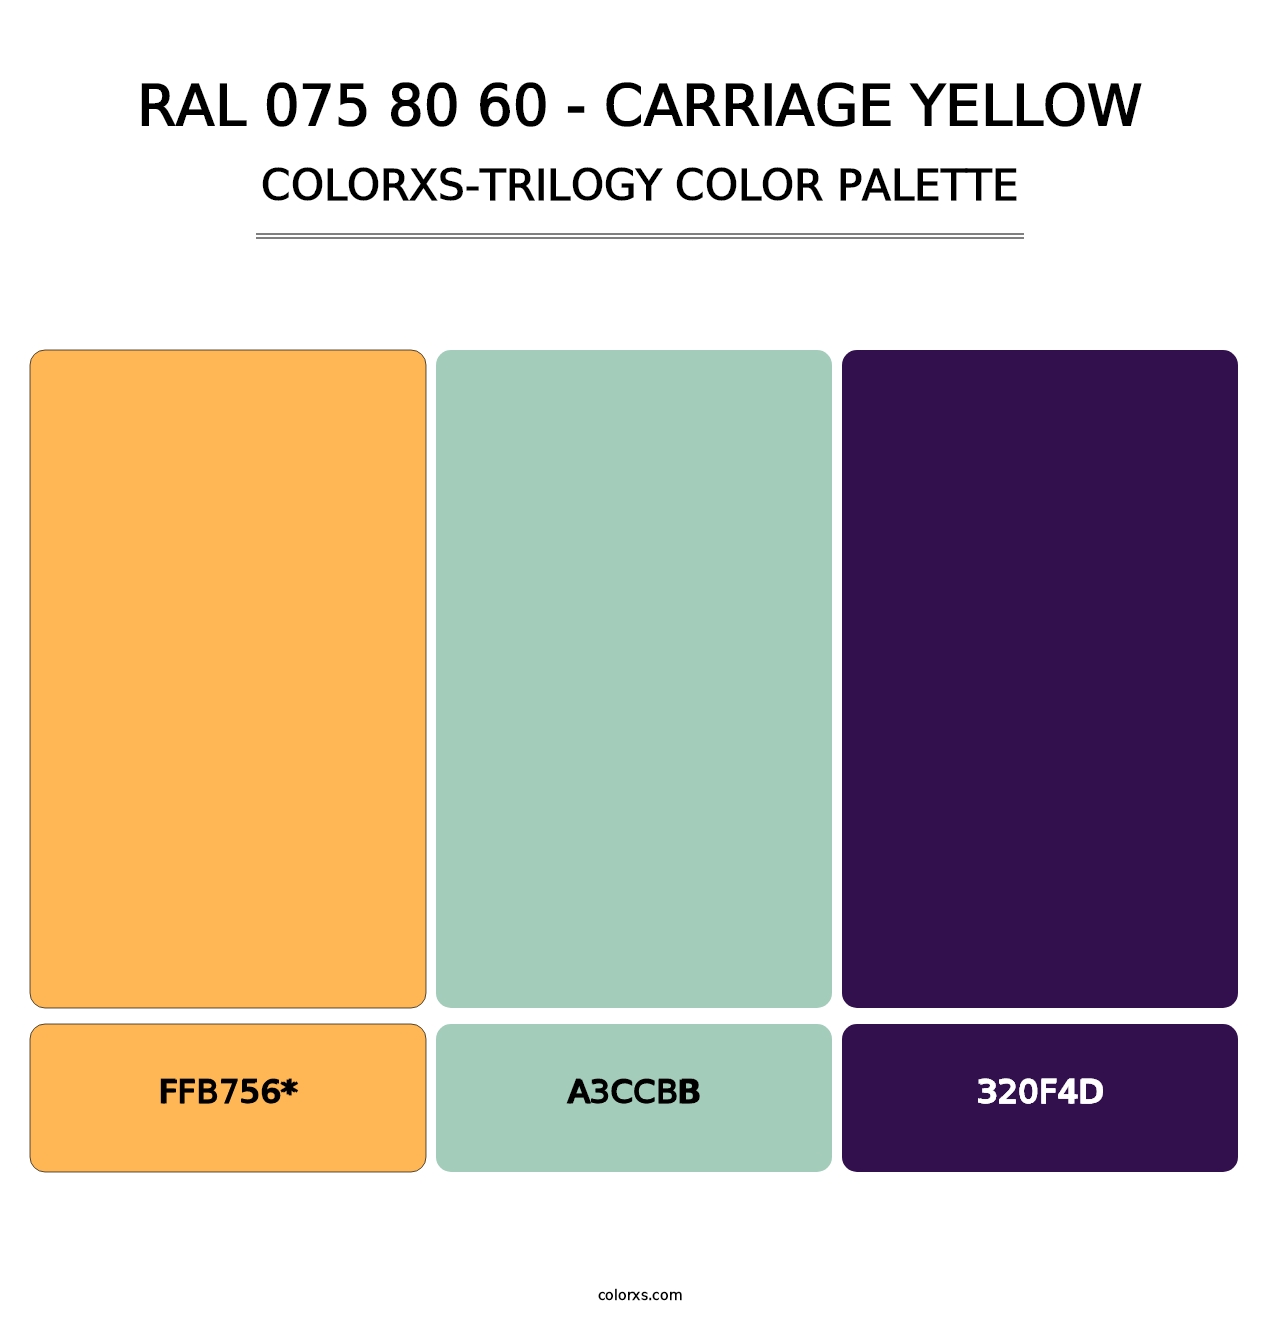 RAL 075 80 60 - Carriage Yellow - Colorxs Trilogy Palette